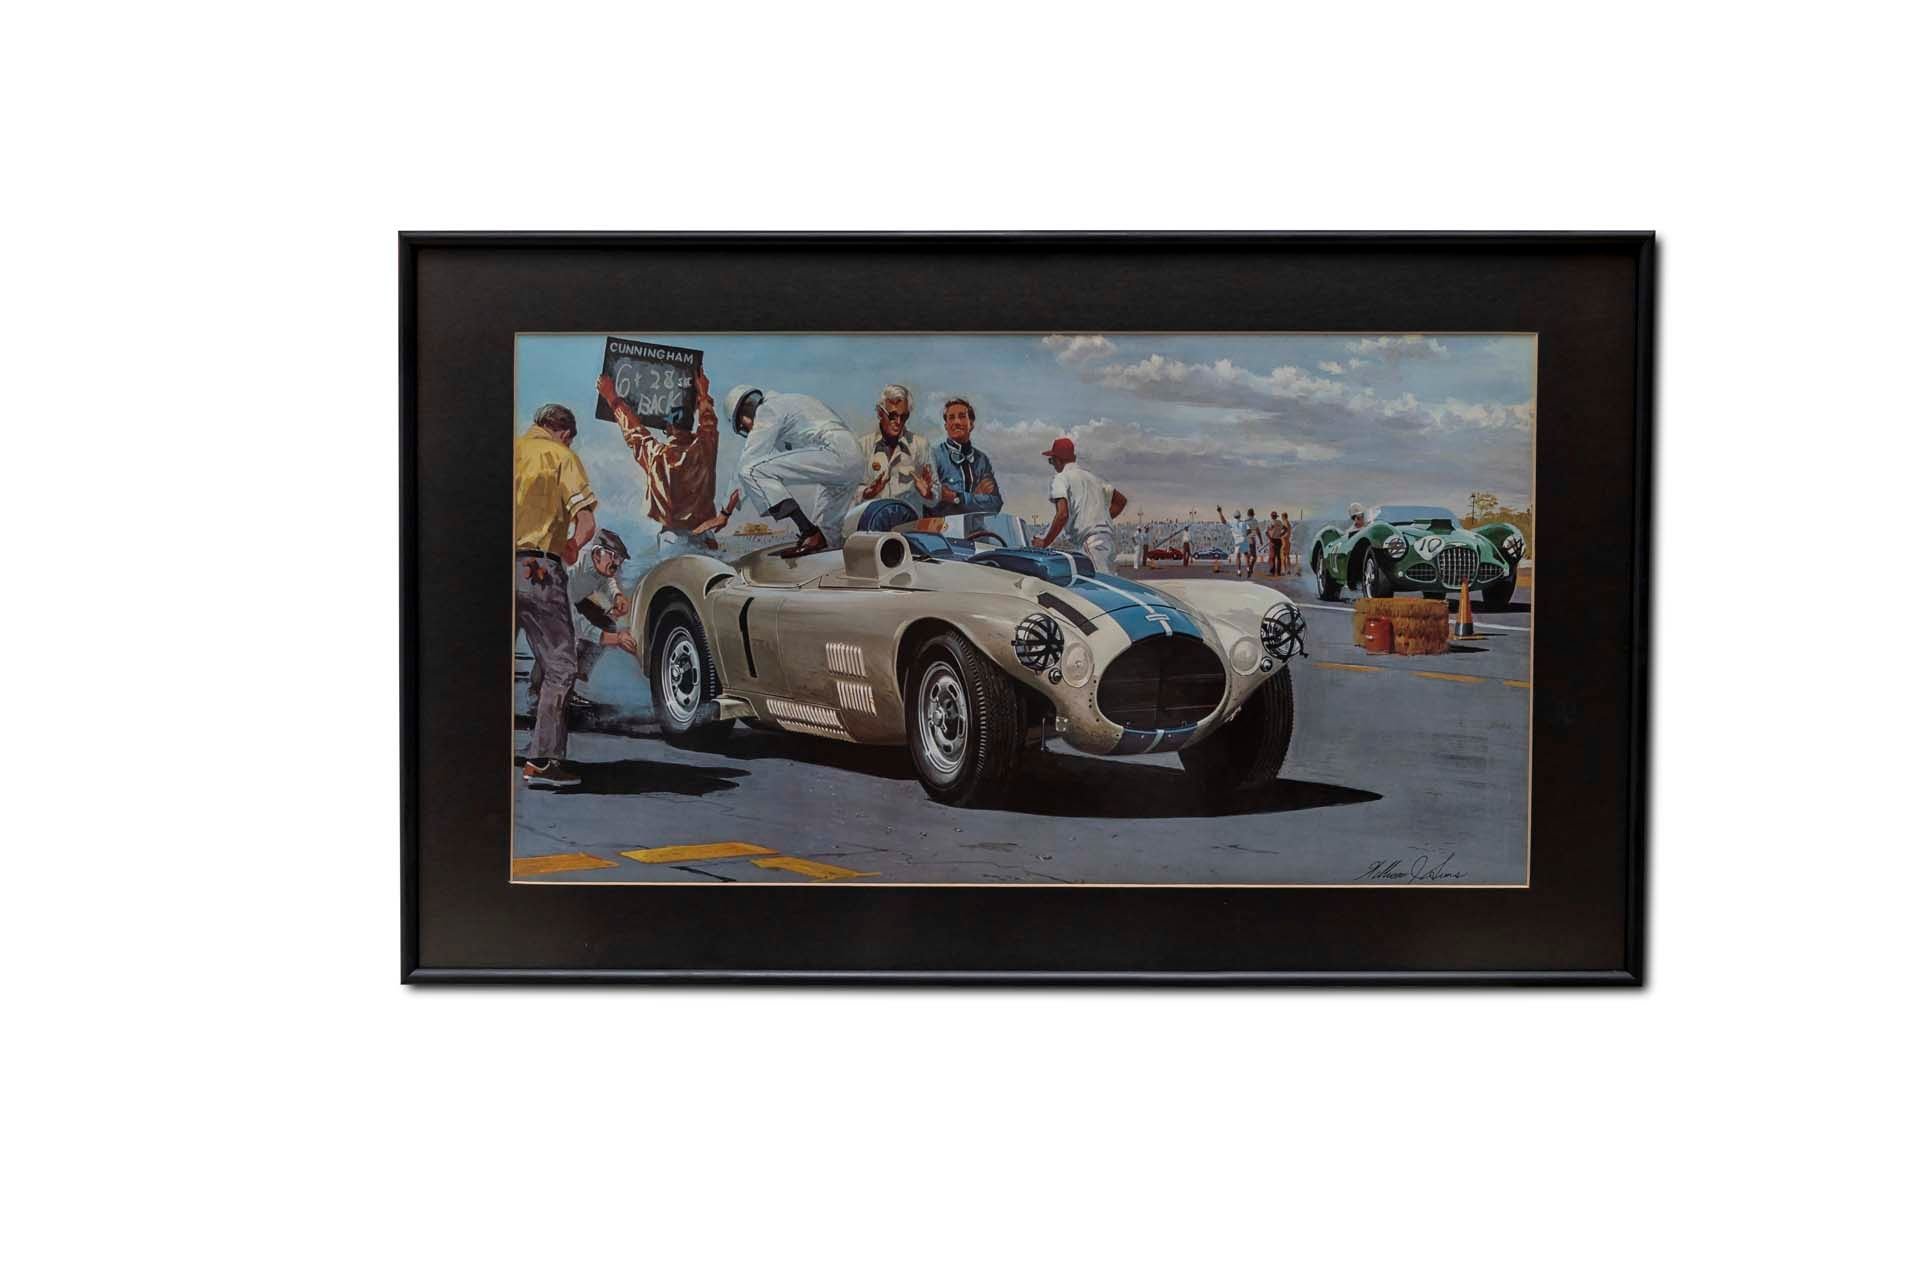 Broad Arrow Auctions | Framed '1958 Cunningham' William J Sims Signed Print